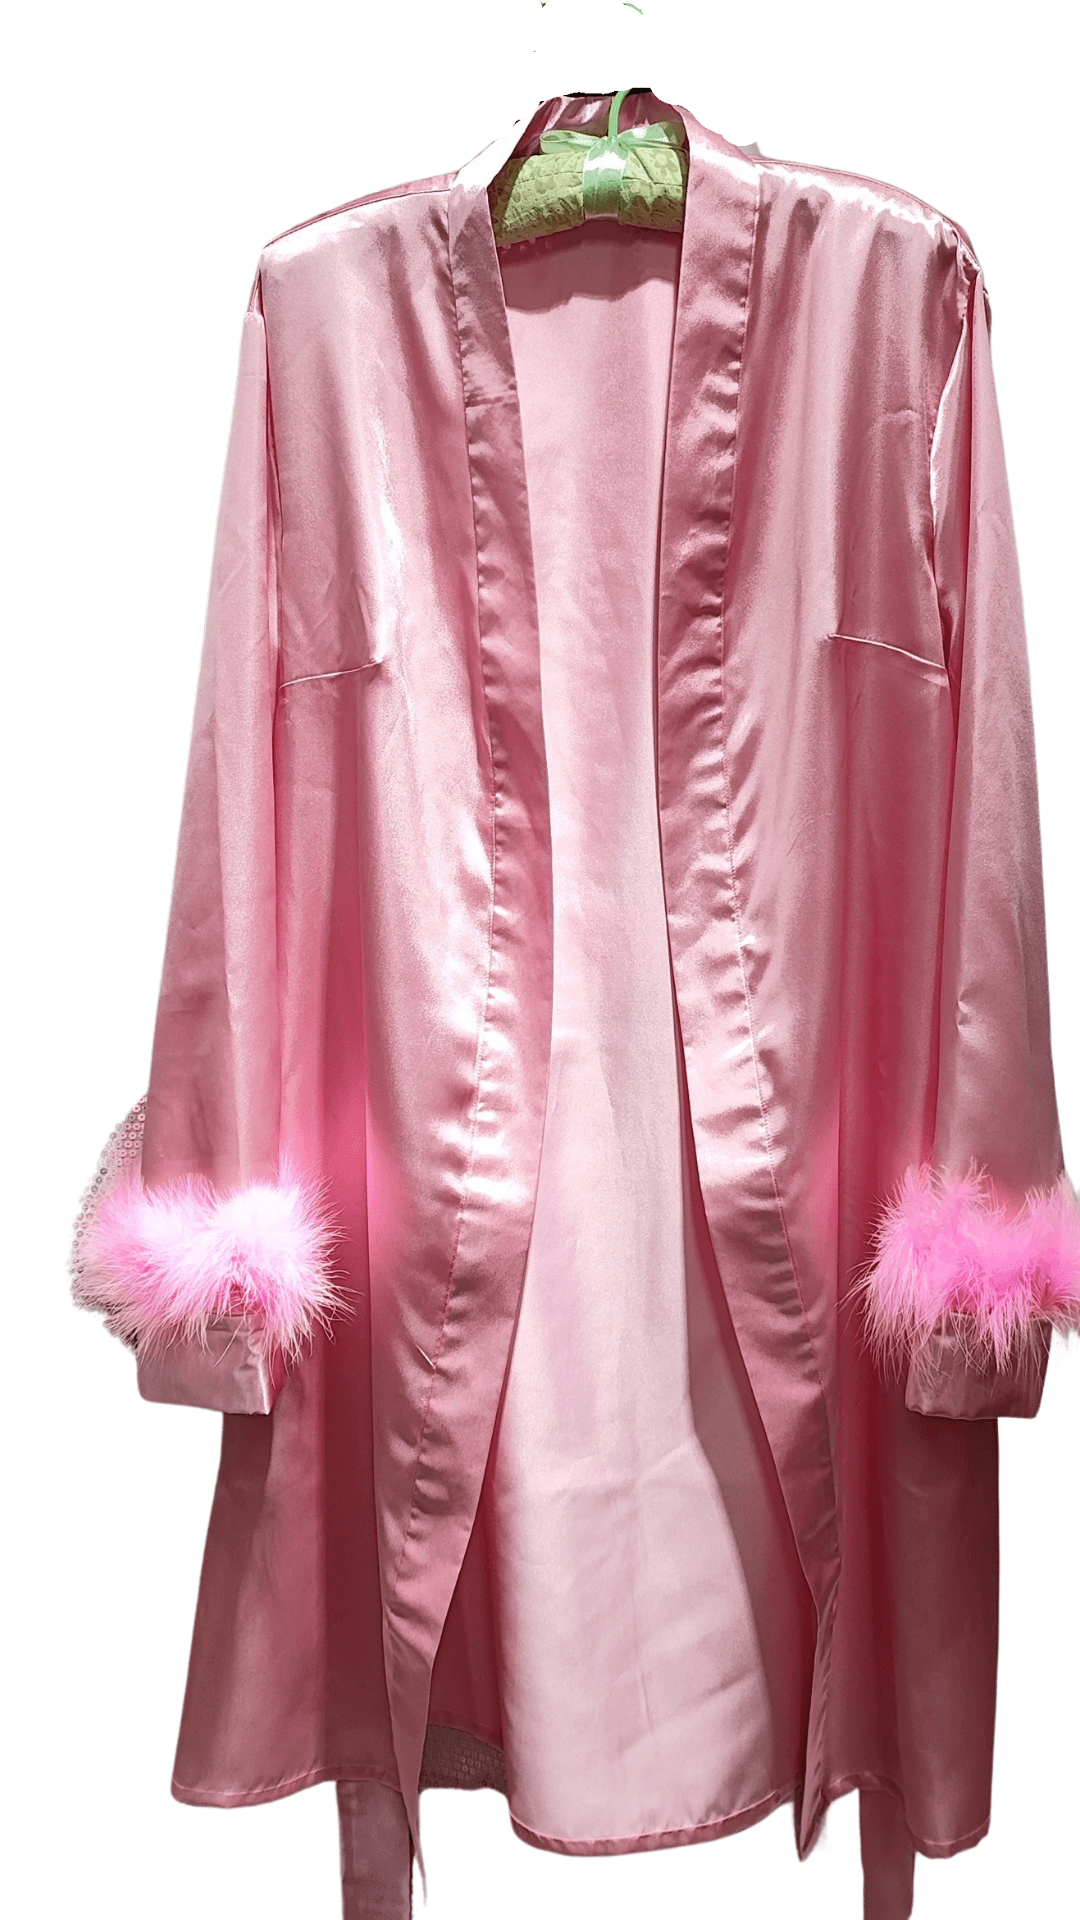 Pink Matching Custom Satin Robes for Dog Owners with Fur Trims - Pooch La La